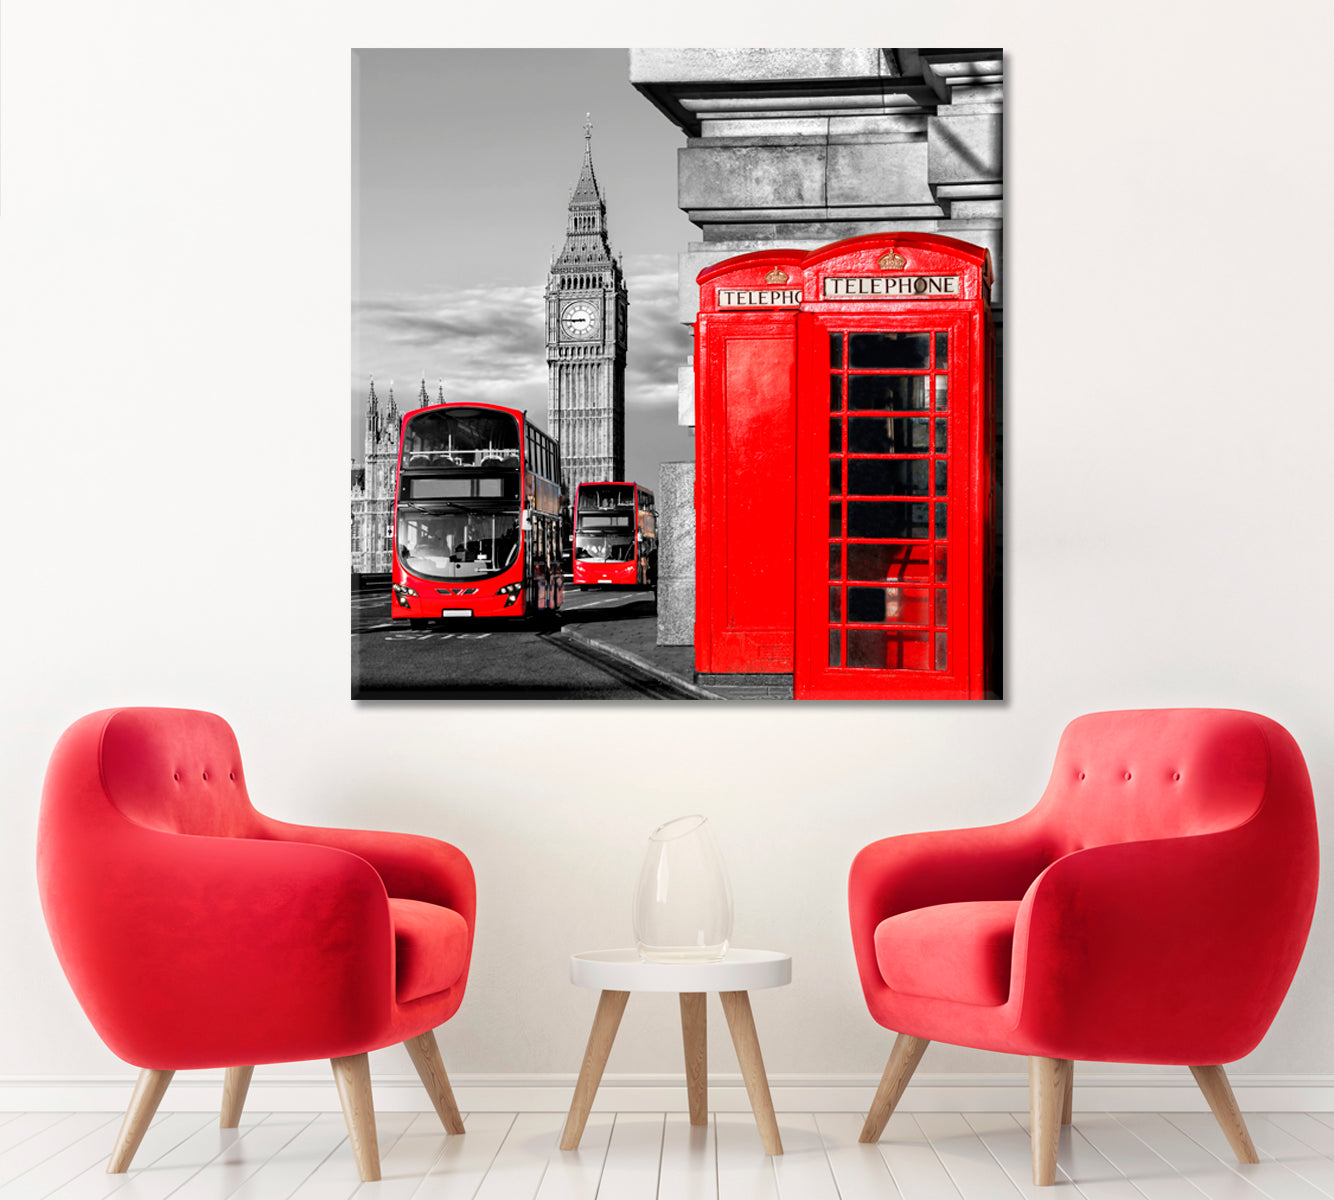 Big Ben & Double Decker Bus & Red Telephone Booths London Canvas Print ArtLexy 1 Panel 12"x12" inches 